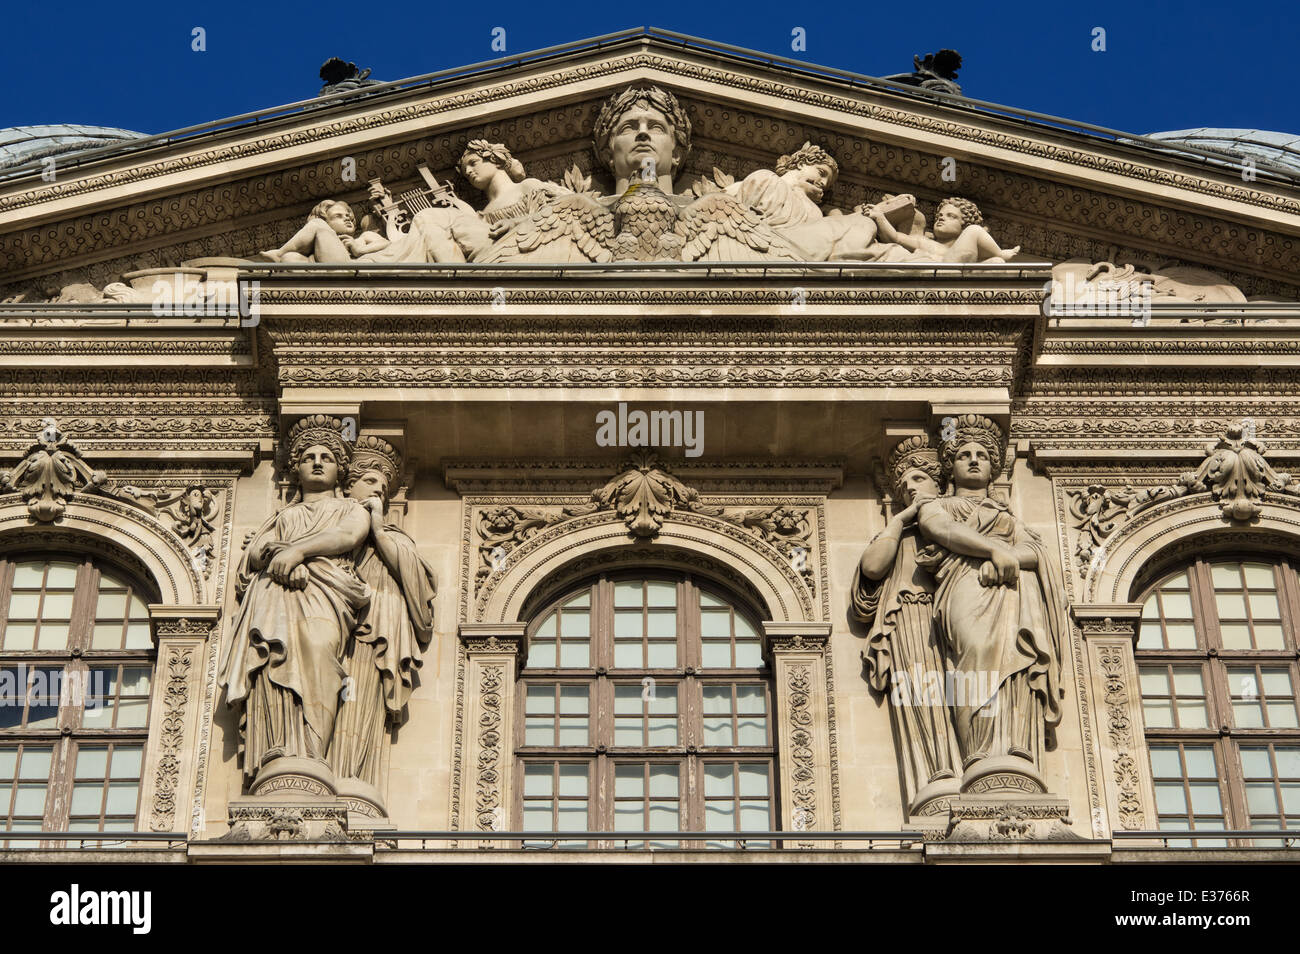 Architectural masterpiece of the French Renaissance, constructed of cut stone. Stock Photo